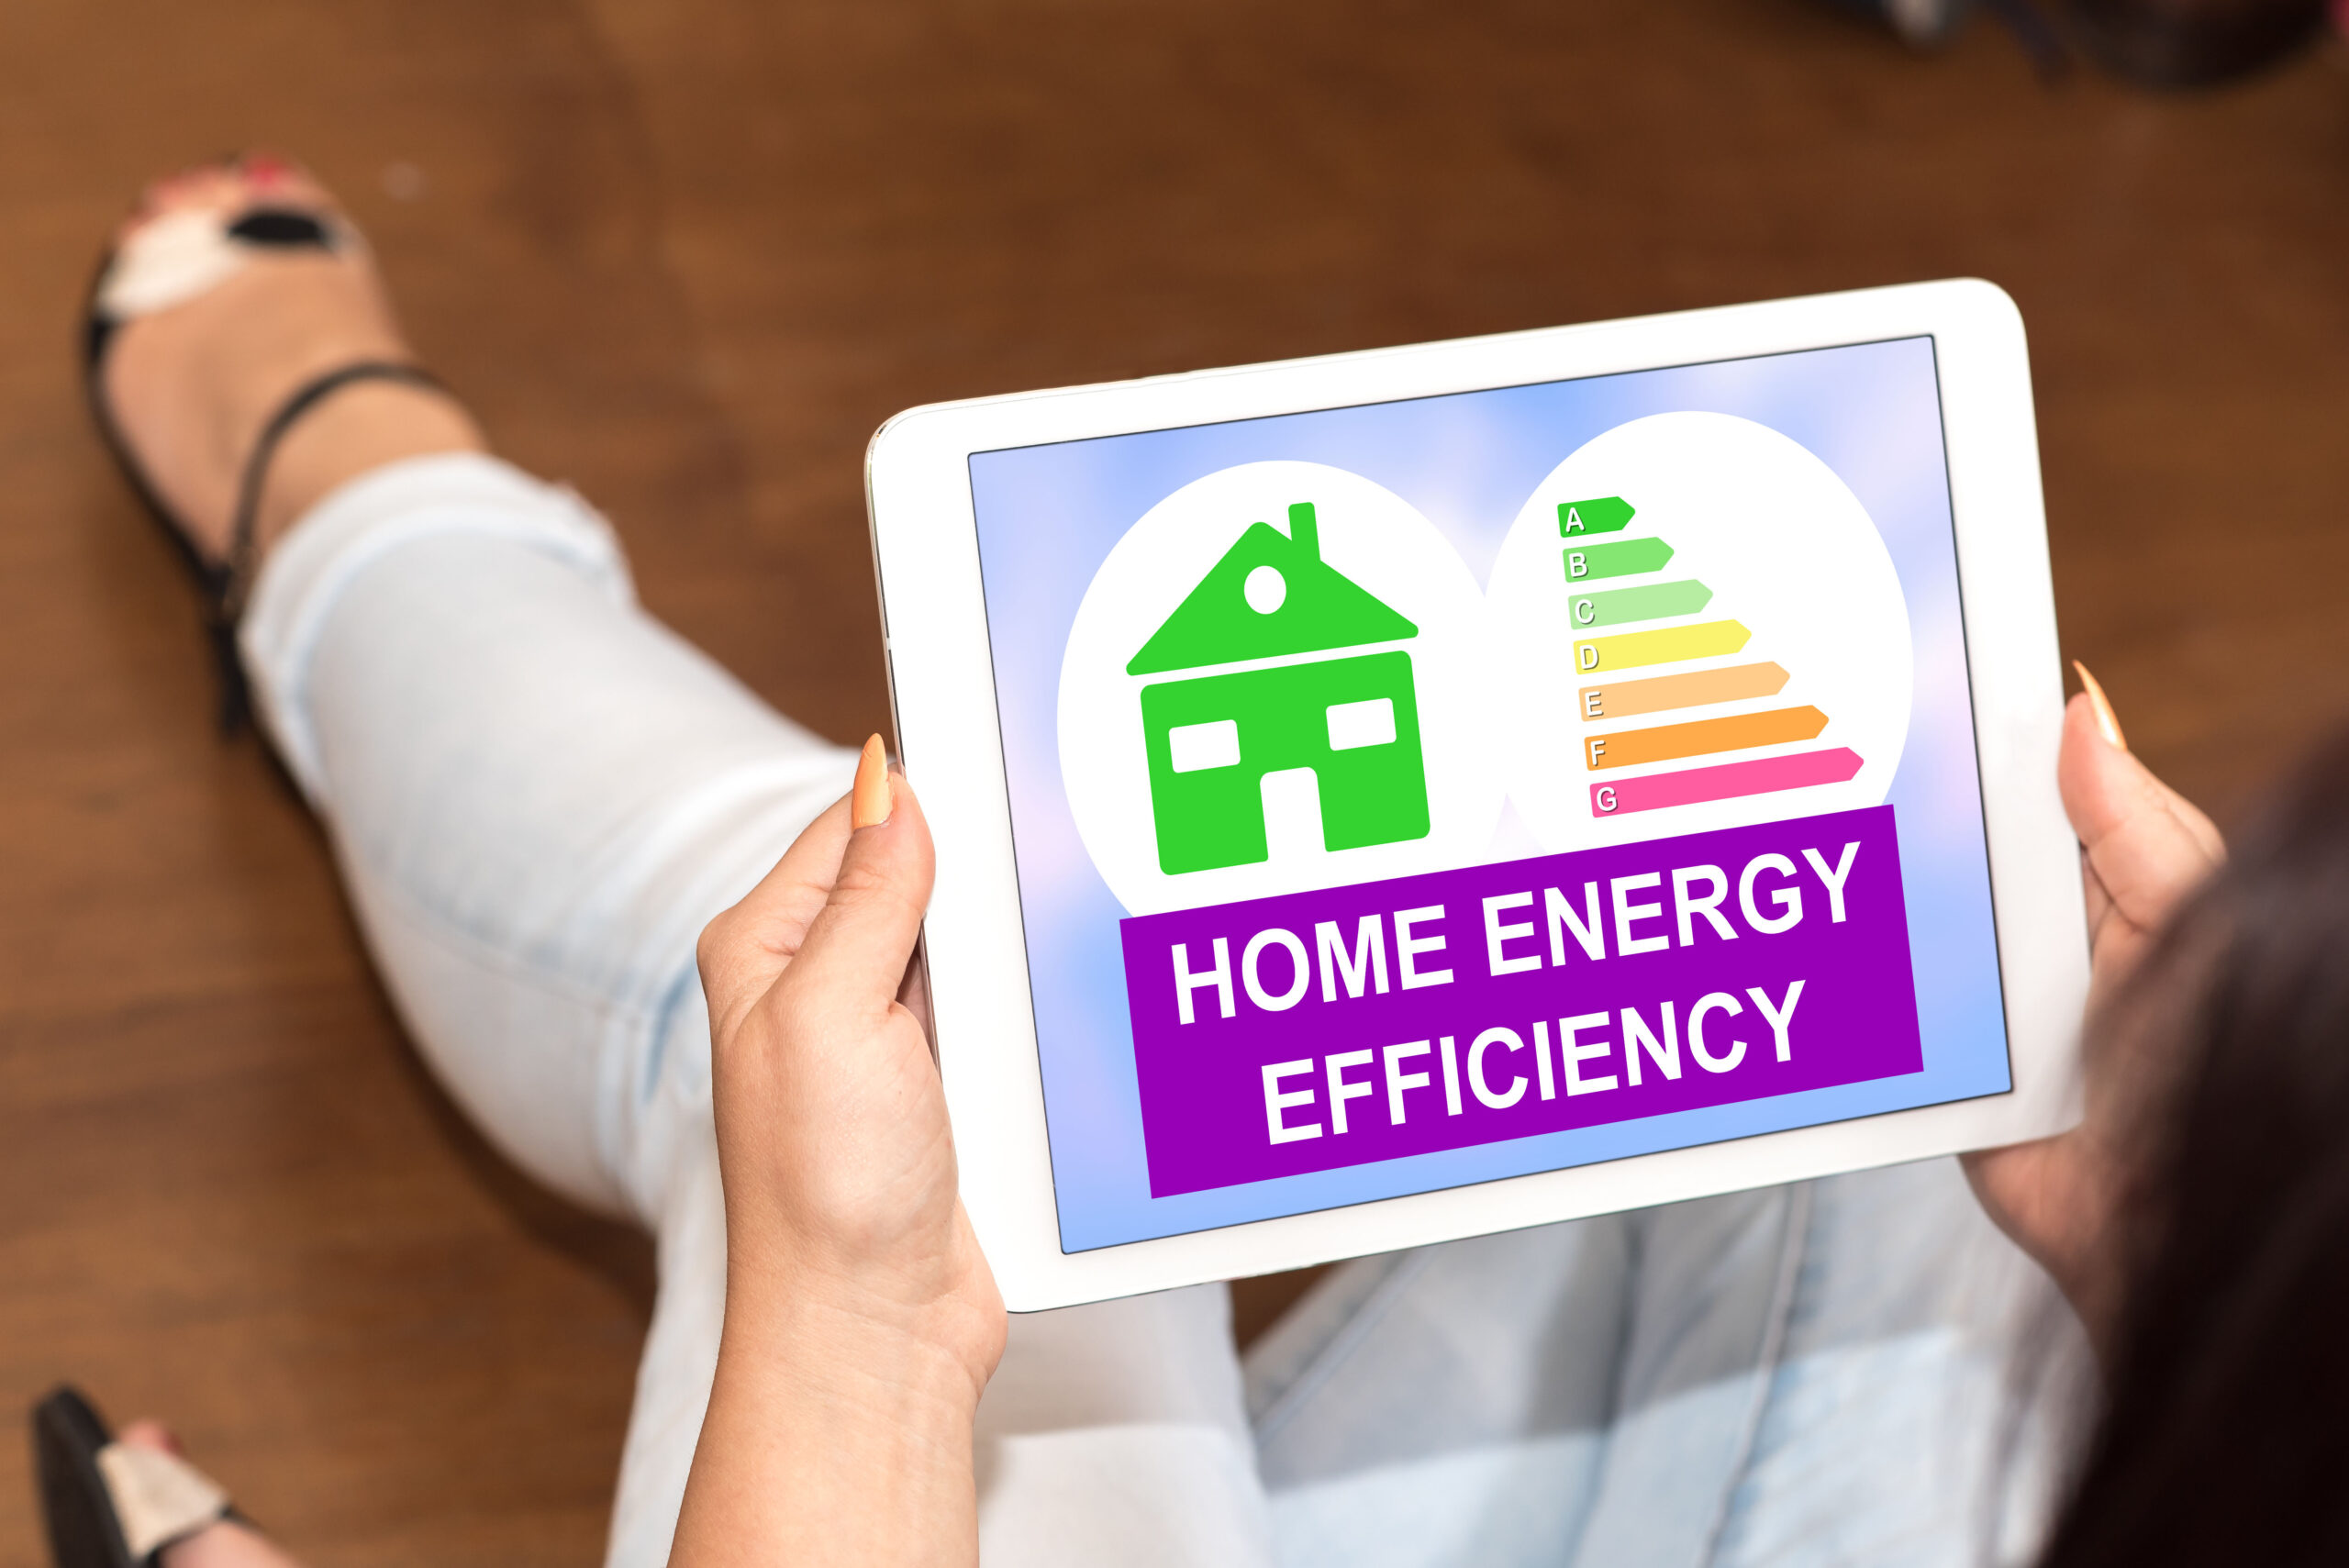 Home energy efficiency concept on a tablet